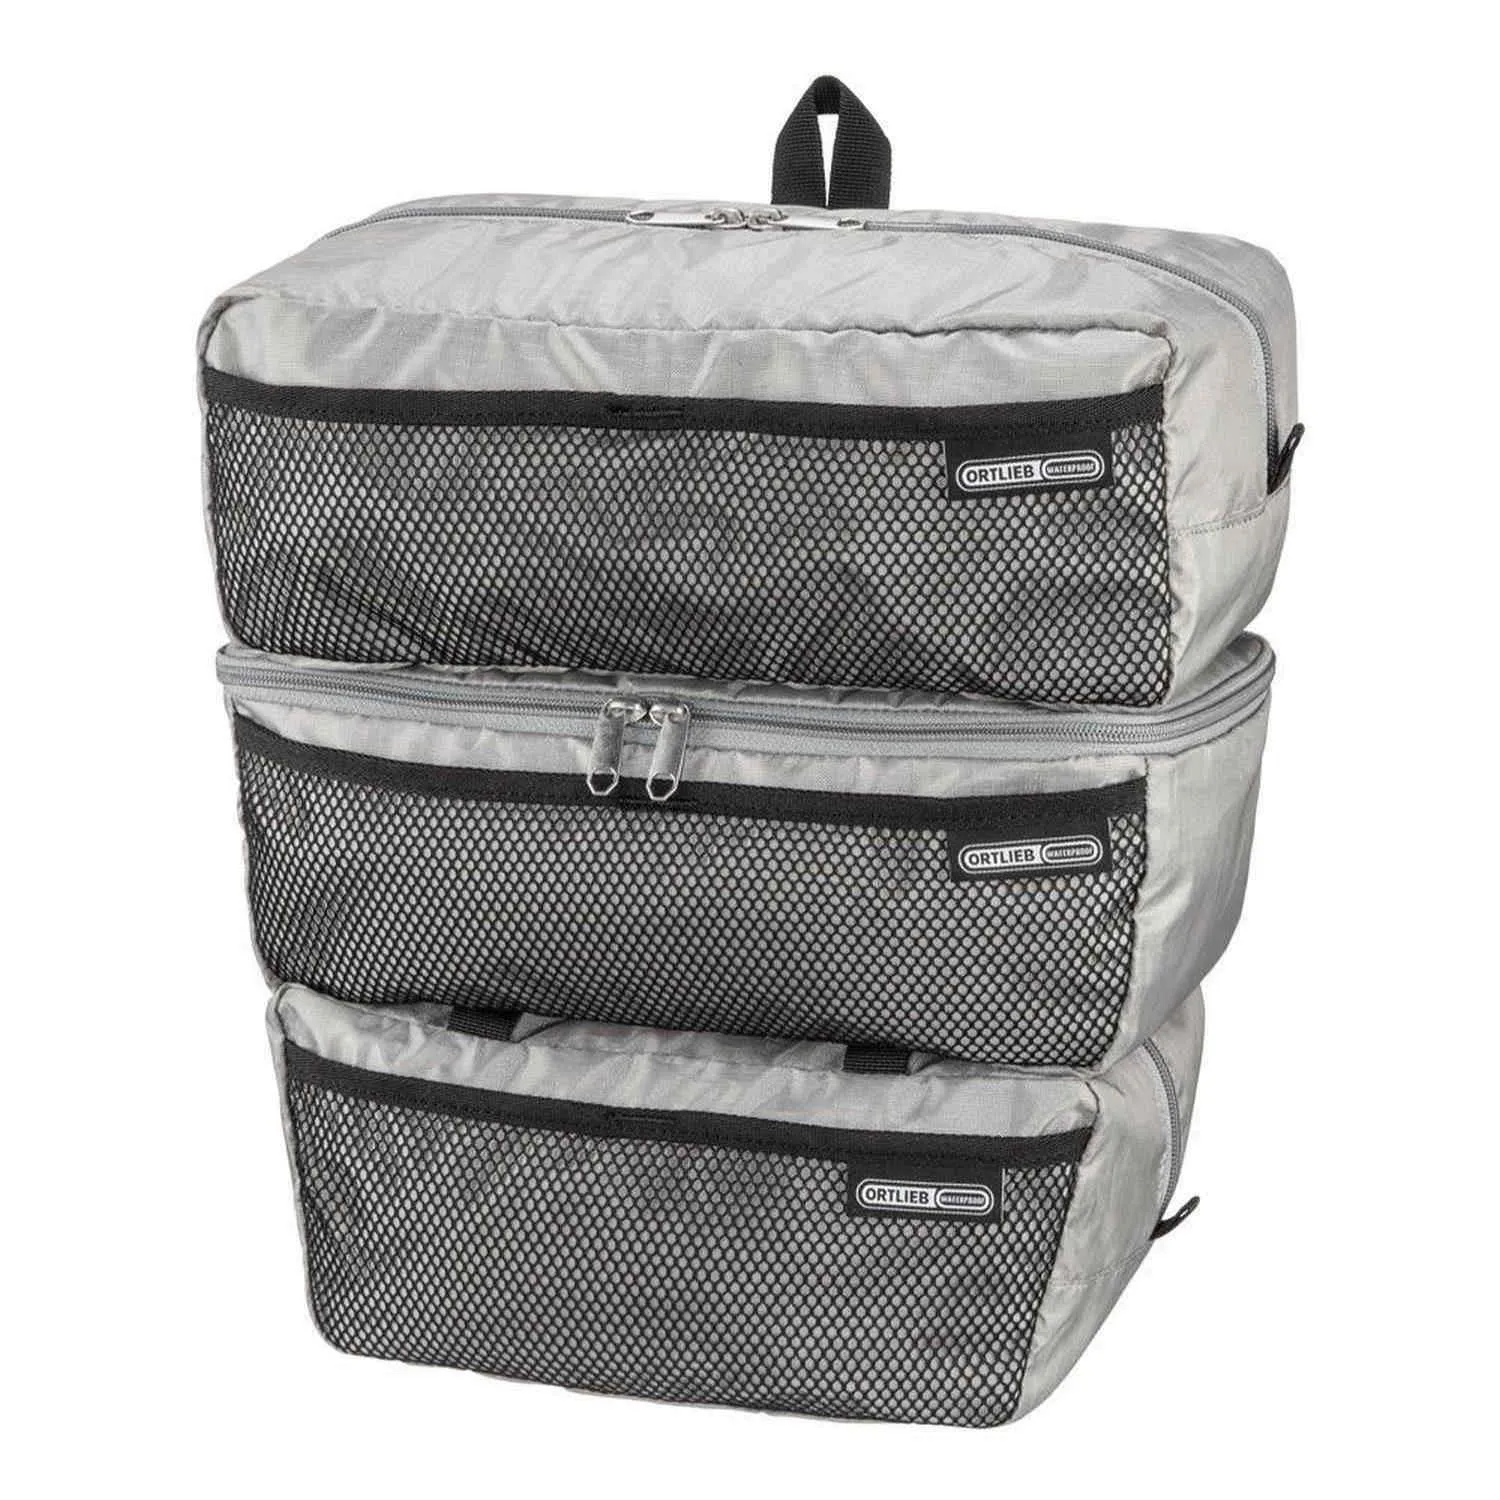 packing-cubes-for-panniers_f3905_front.jpg